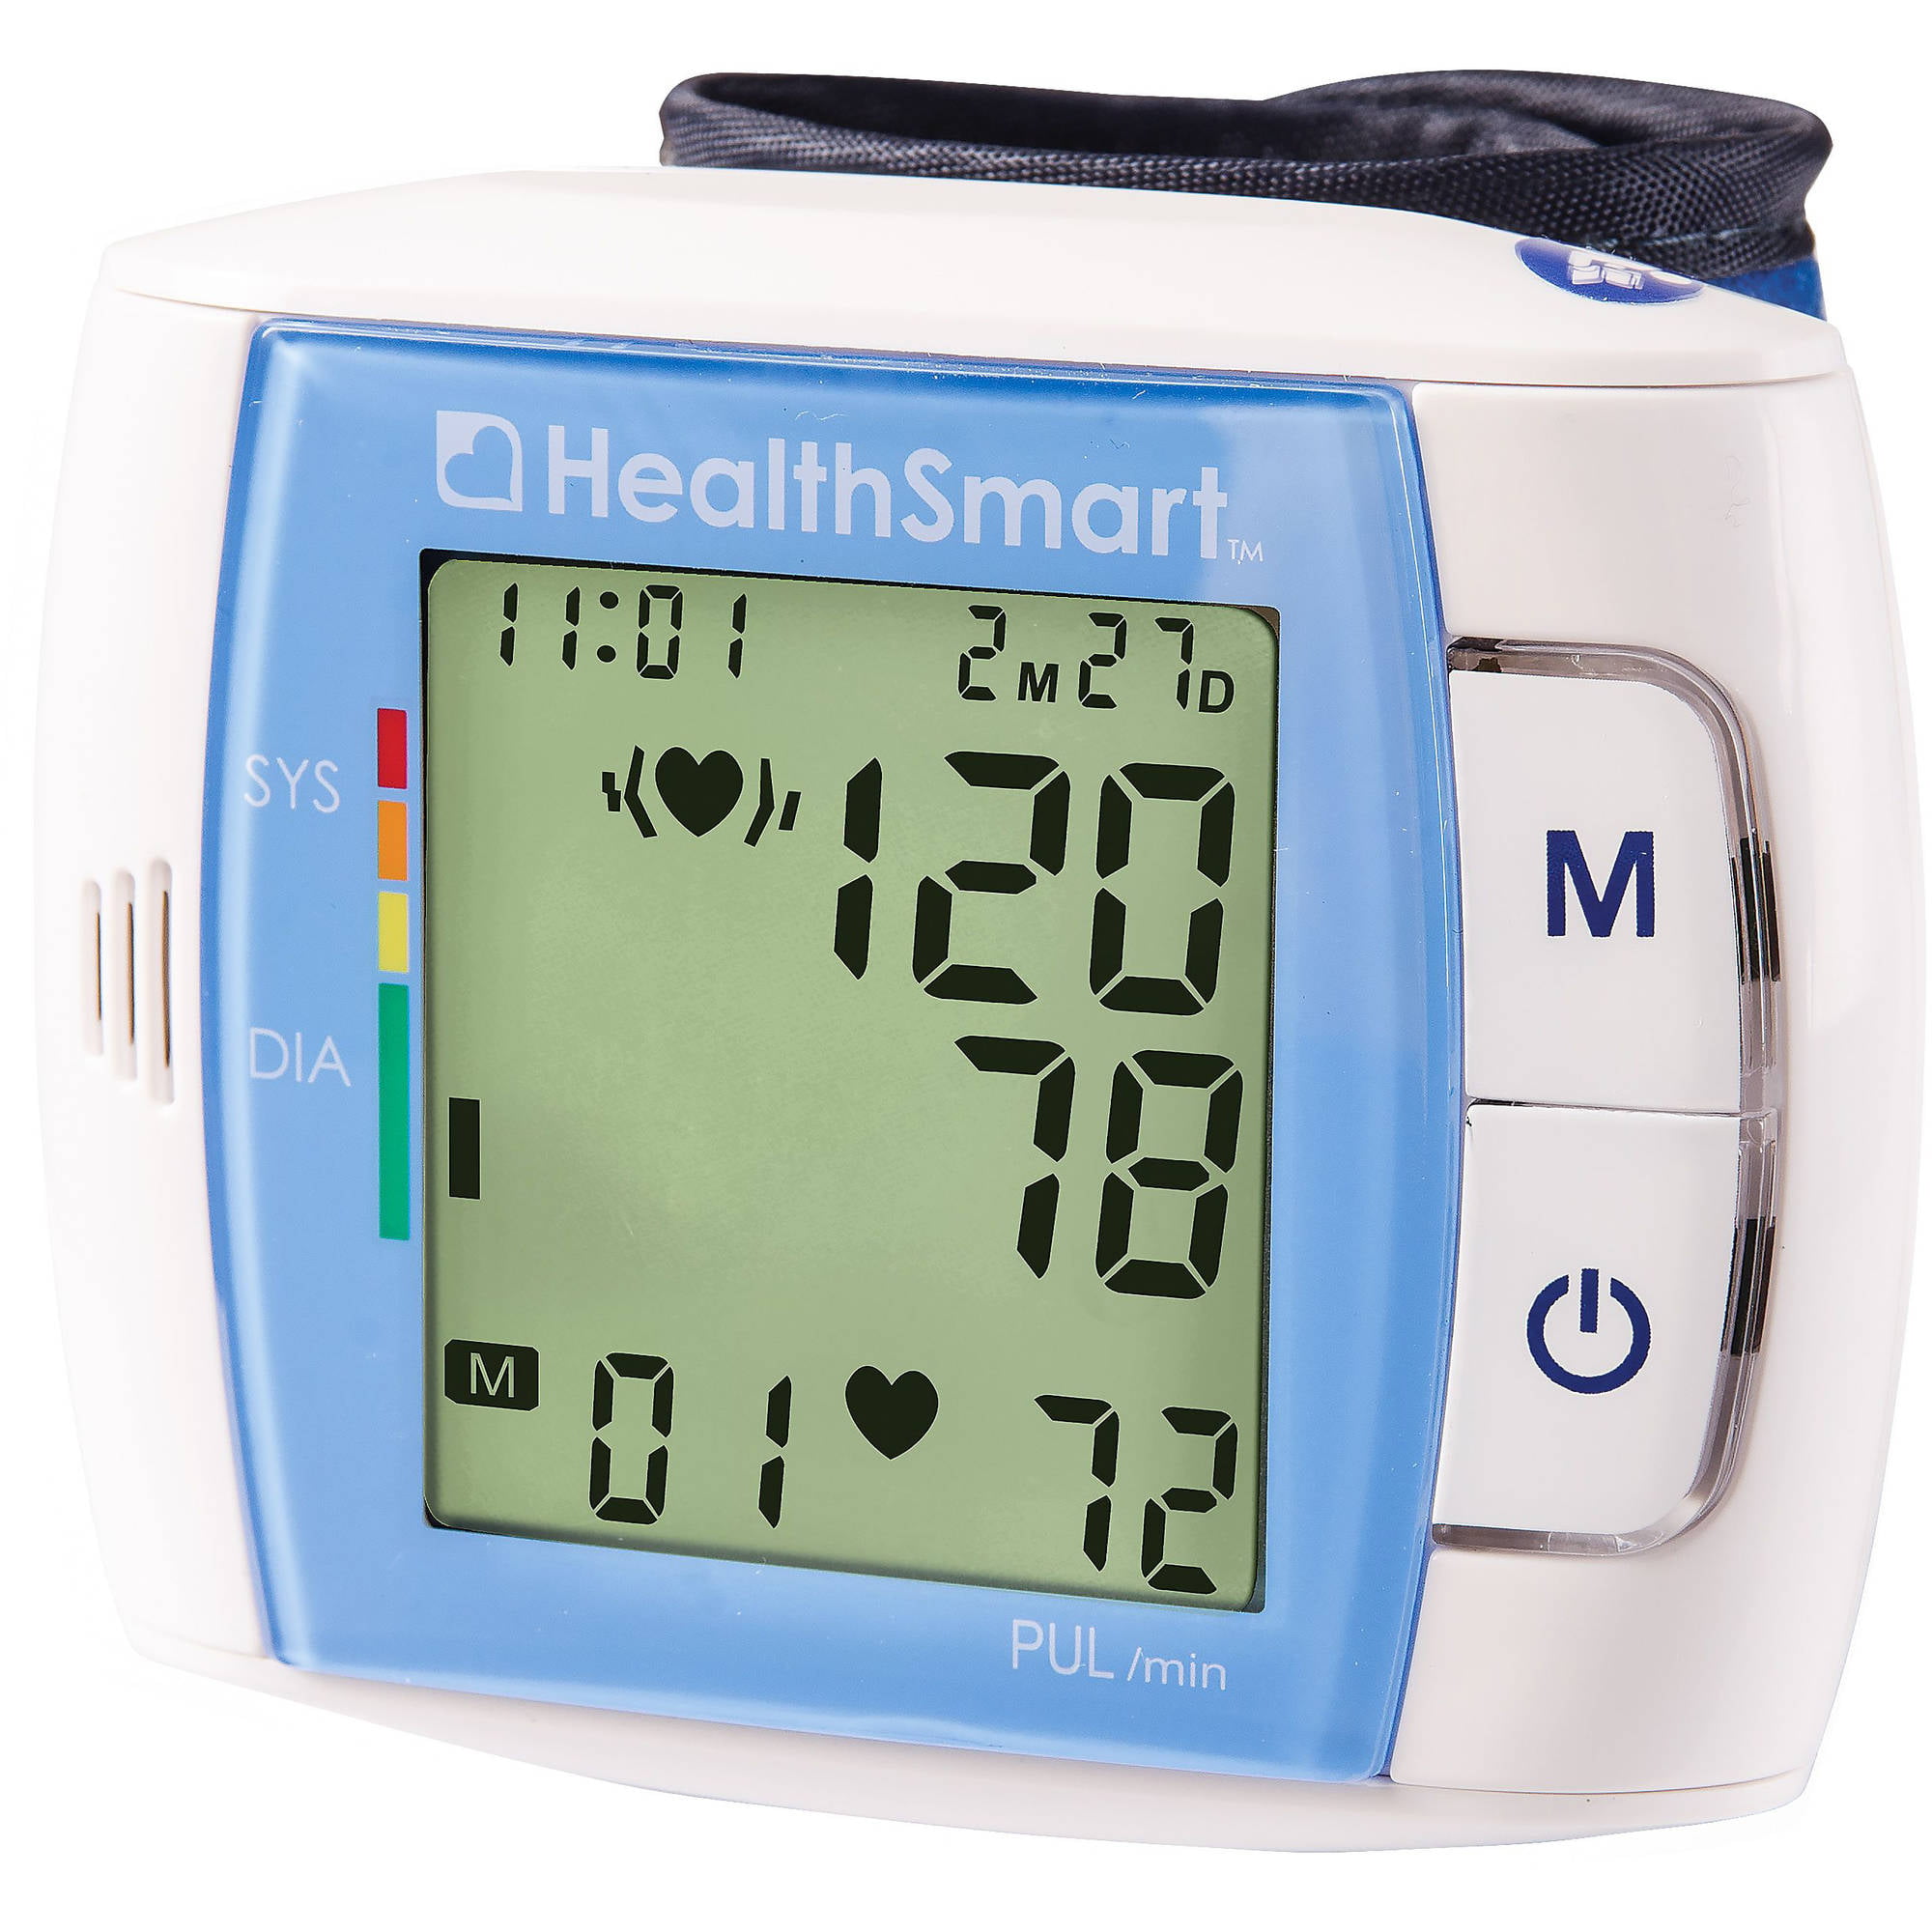 HealthSmart Digital Standard Blood Pressure Monitor with Automatic